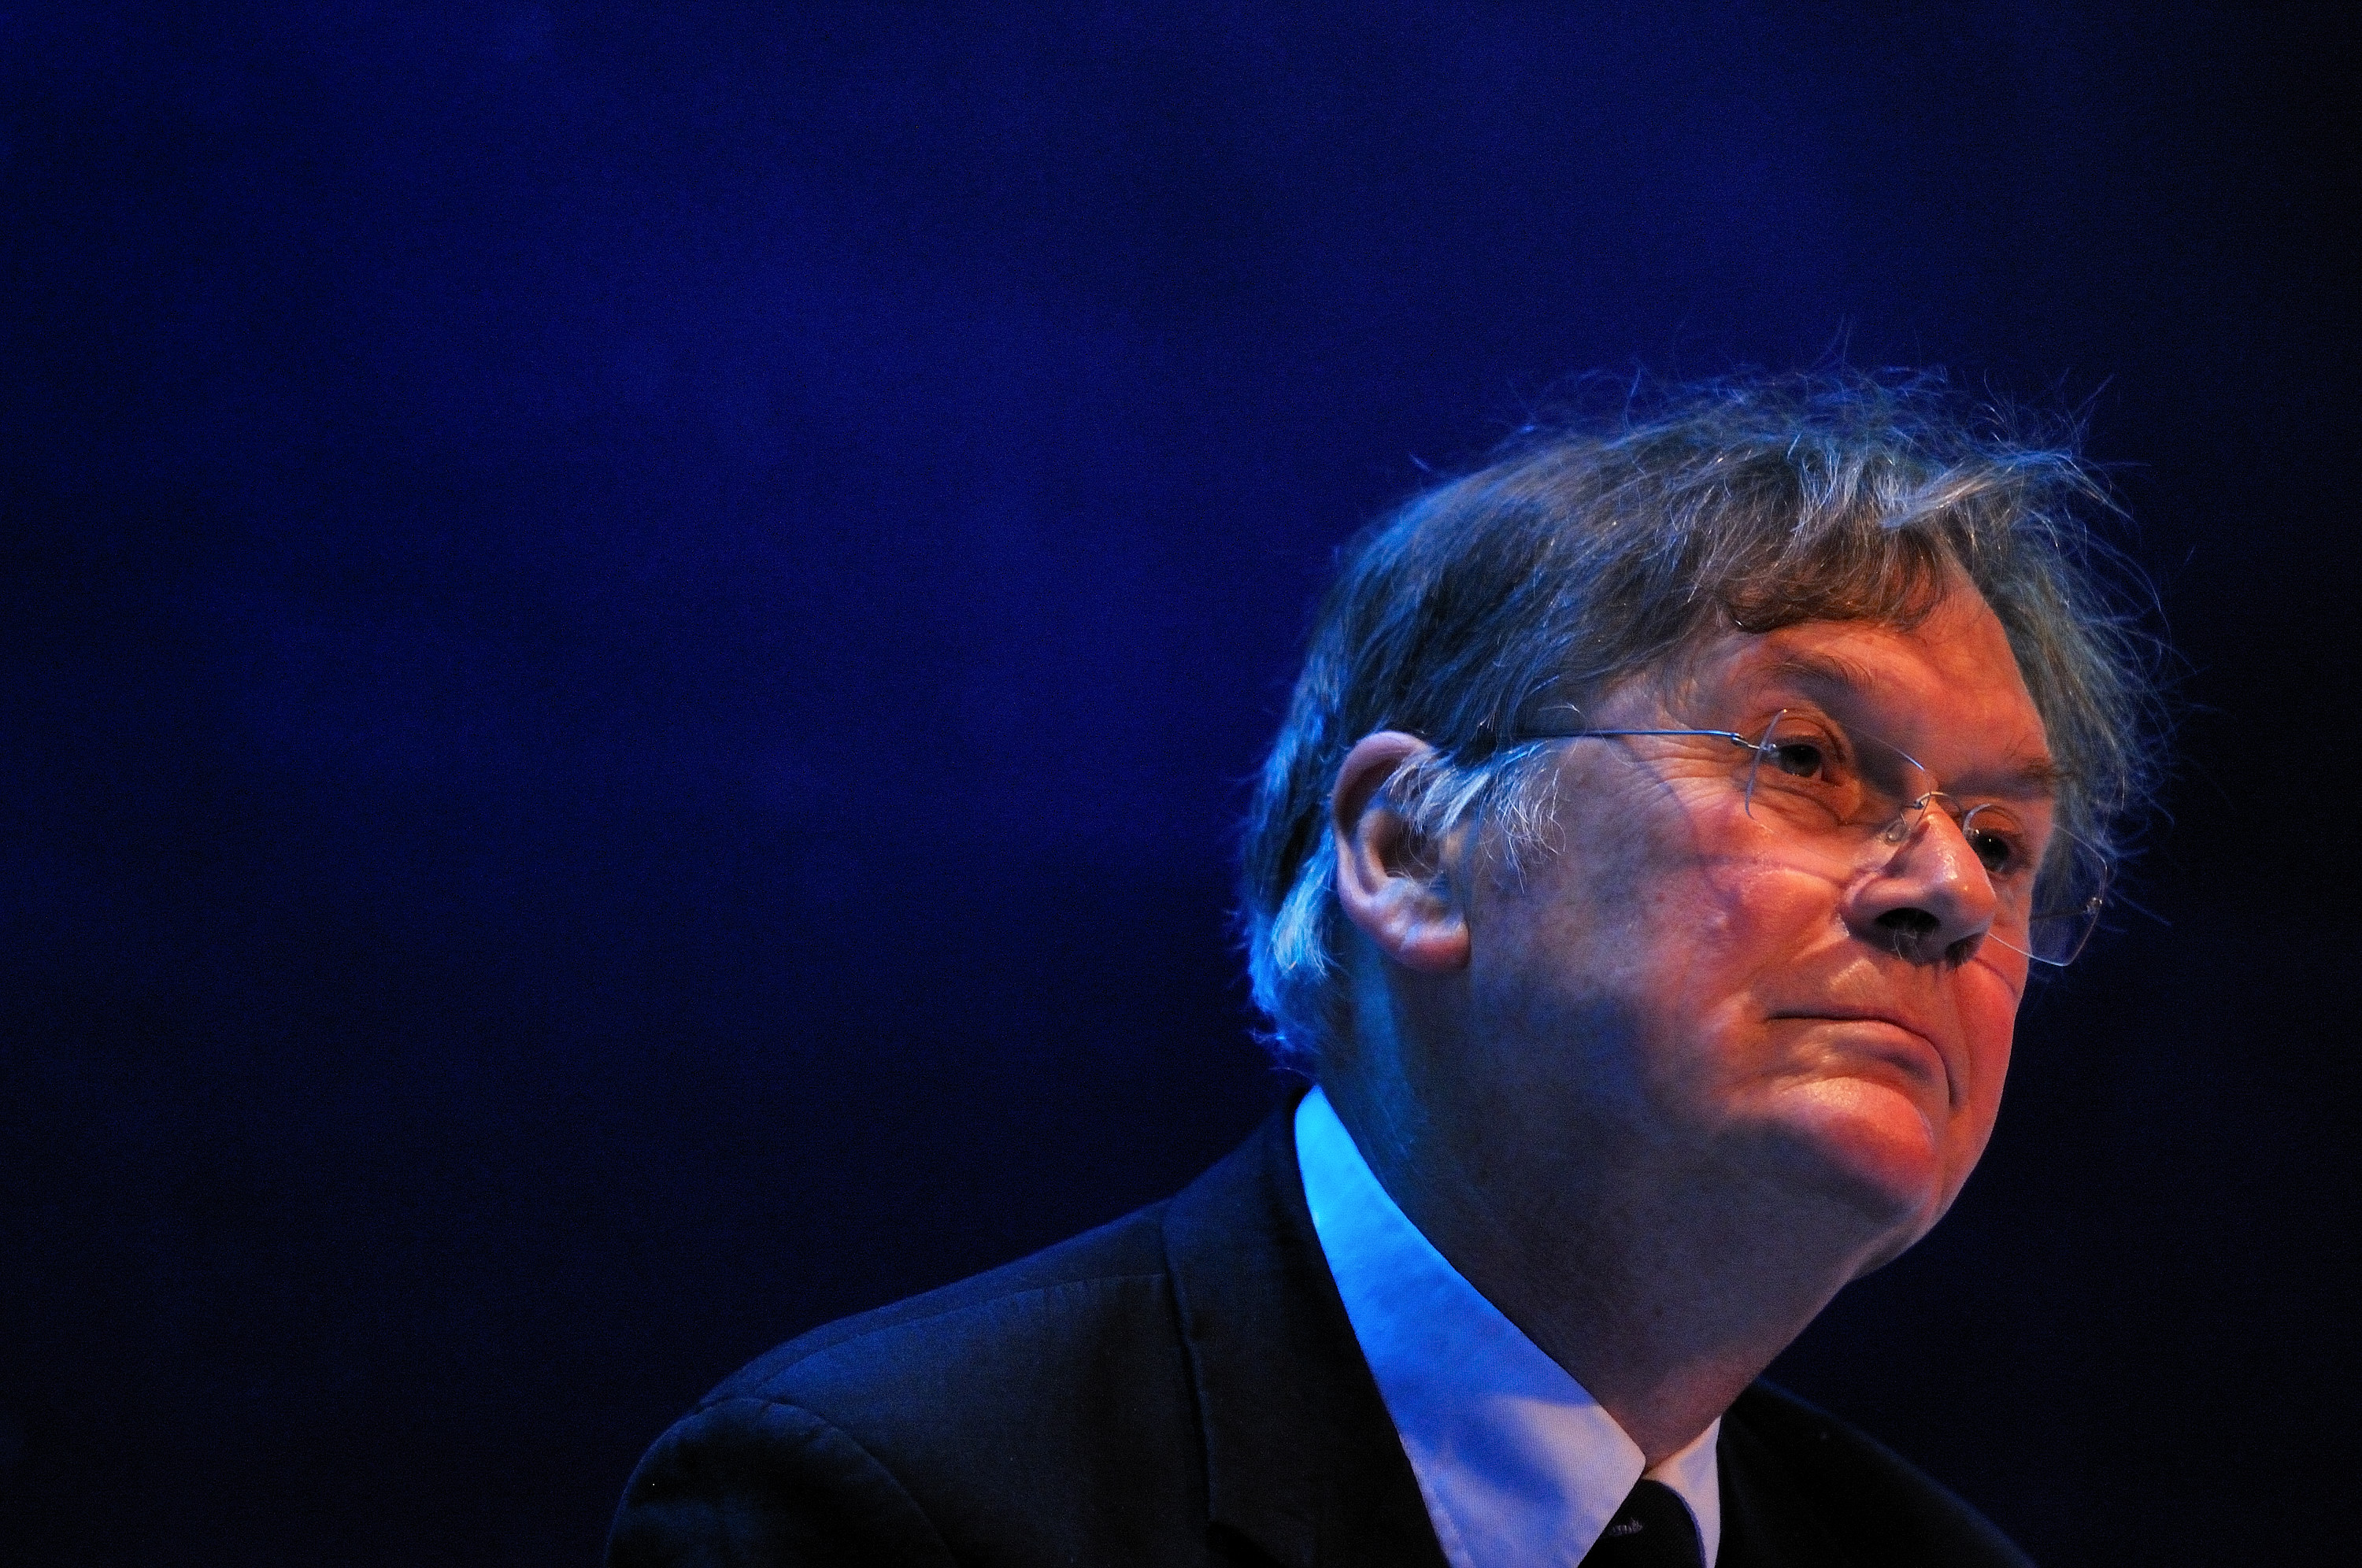 English biochemist Tim Hunt speaks during a session at the World Economic Forum Annual Meeting of the New Champions at Dalian international conference center on September 12, 2013 in Dalian, China.